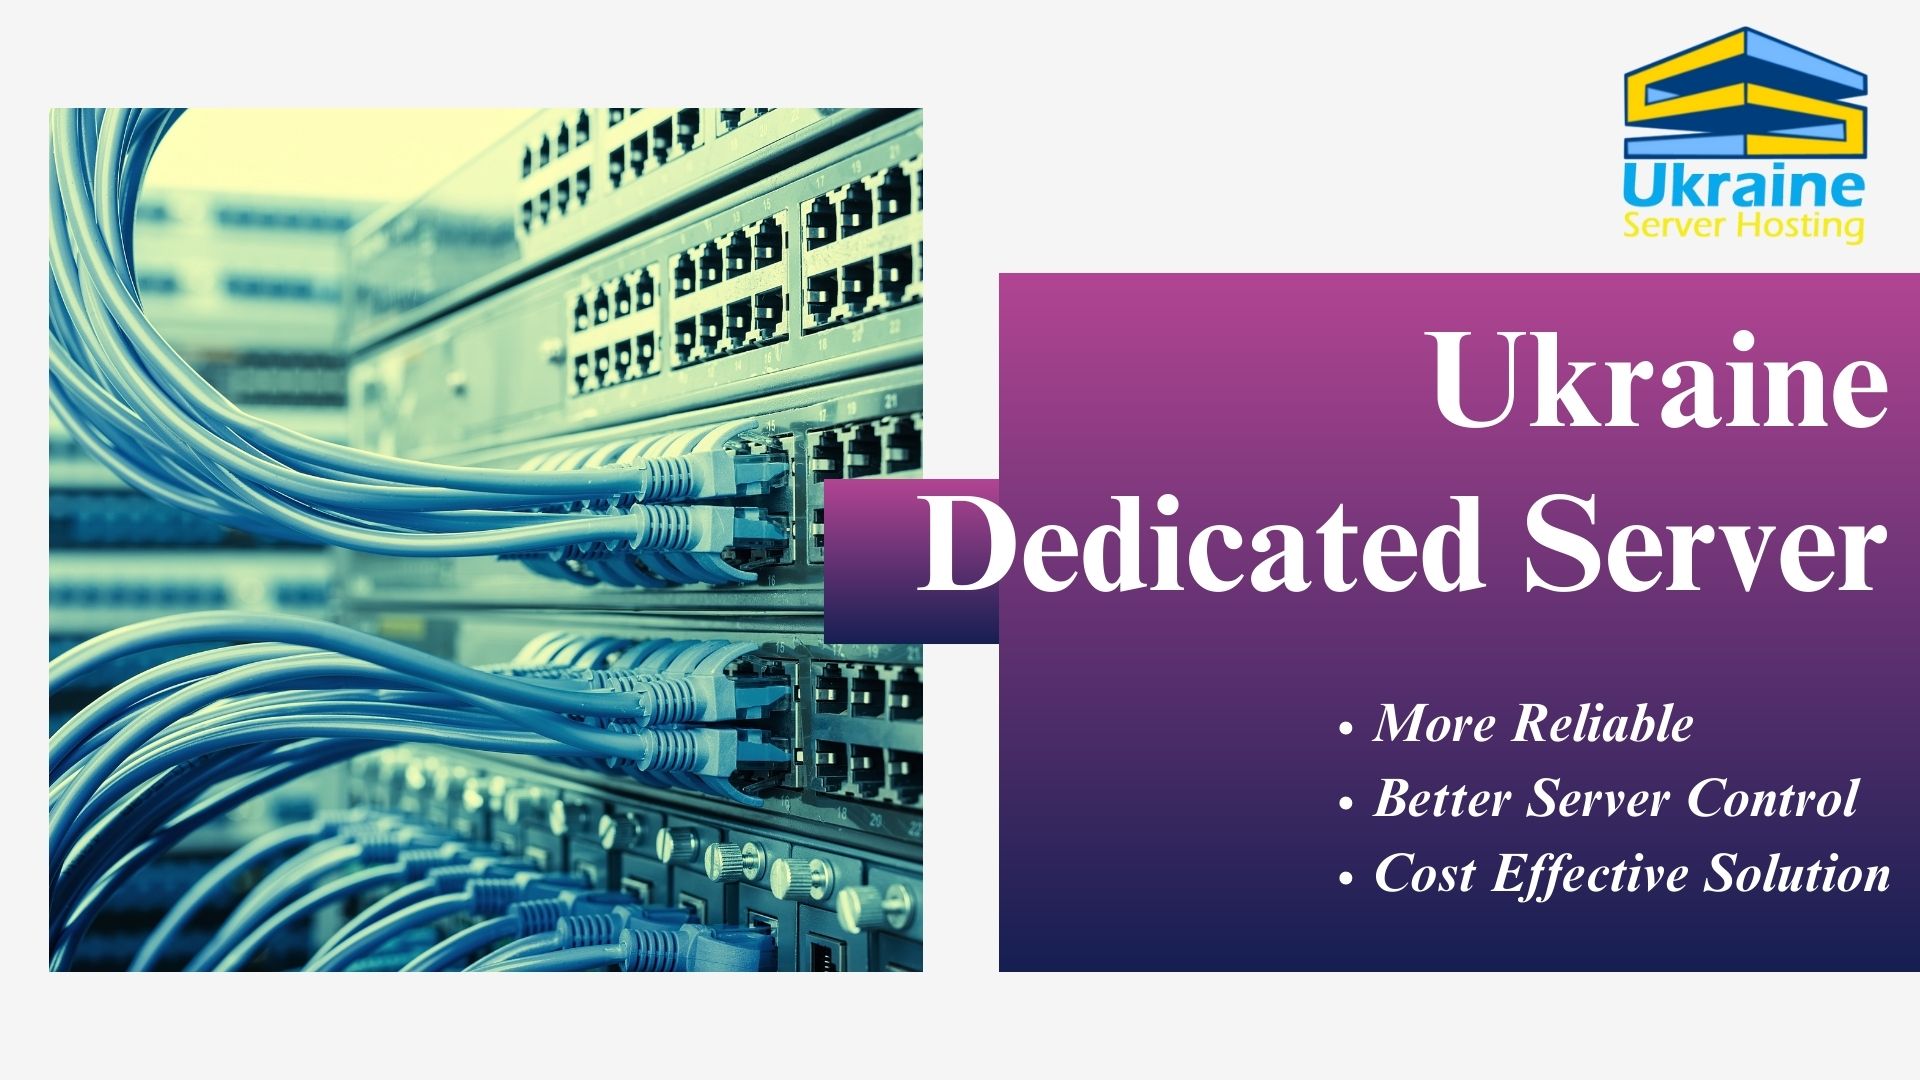 Ukraine dedicated servers stand out as a reliable, high-performance, and cost-effective solution. Whether you're running a small website, a growing e-commerce platform, or a complex web application, a dedicated server in Ukraine can provide the infrastructure you need to succeed.